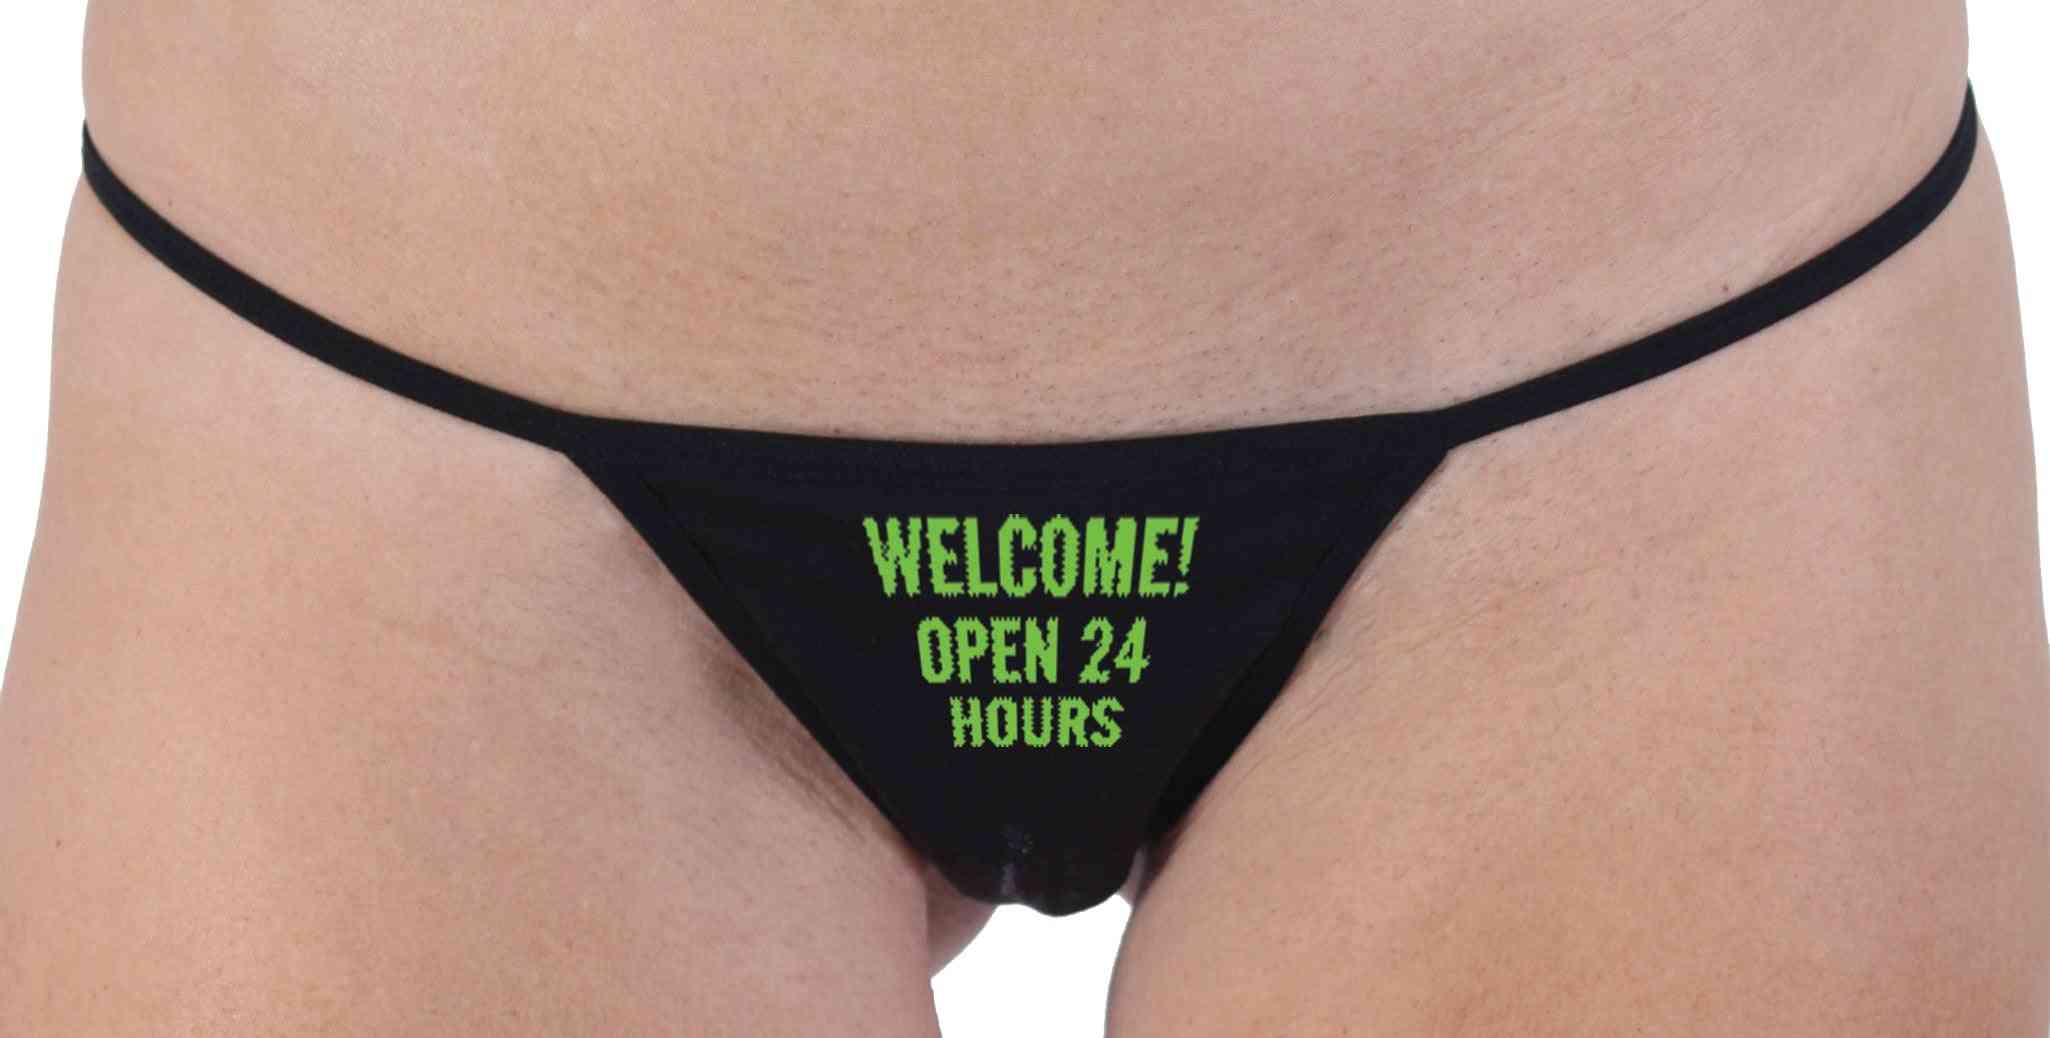 Welcome! Open 24 Hours Print Thong